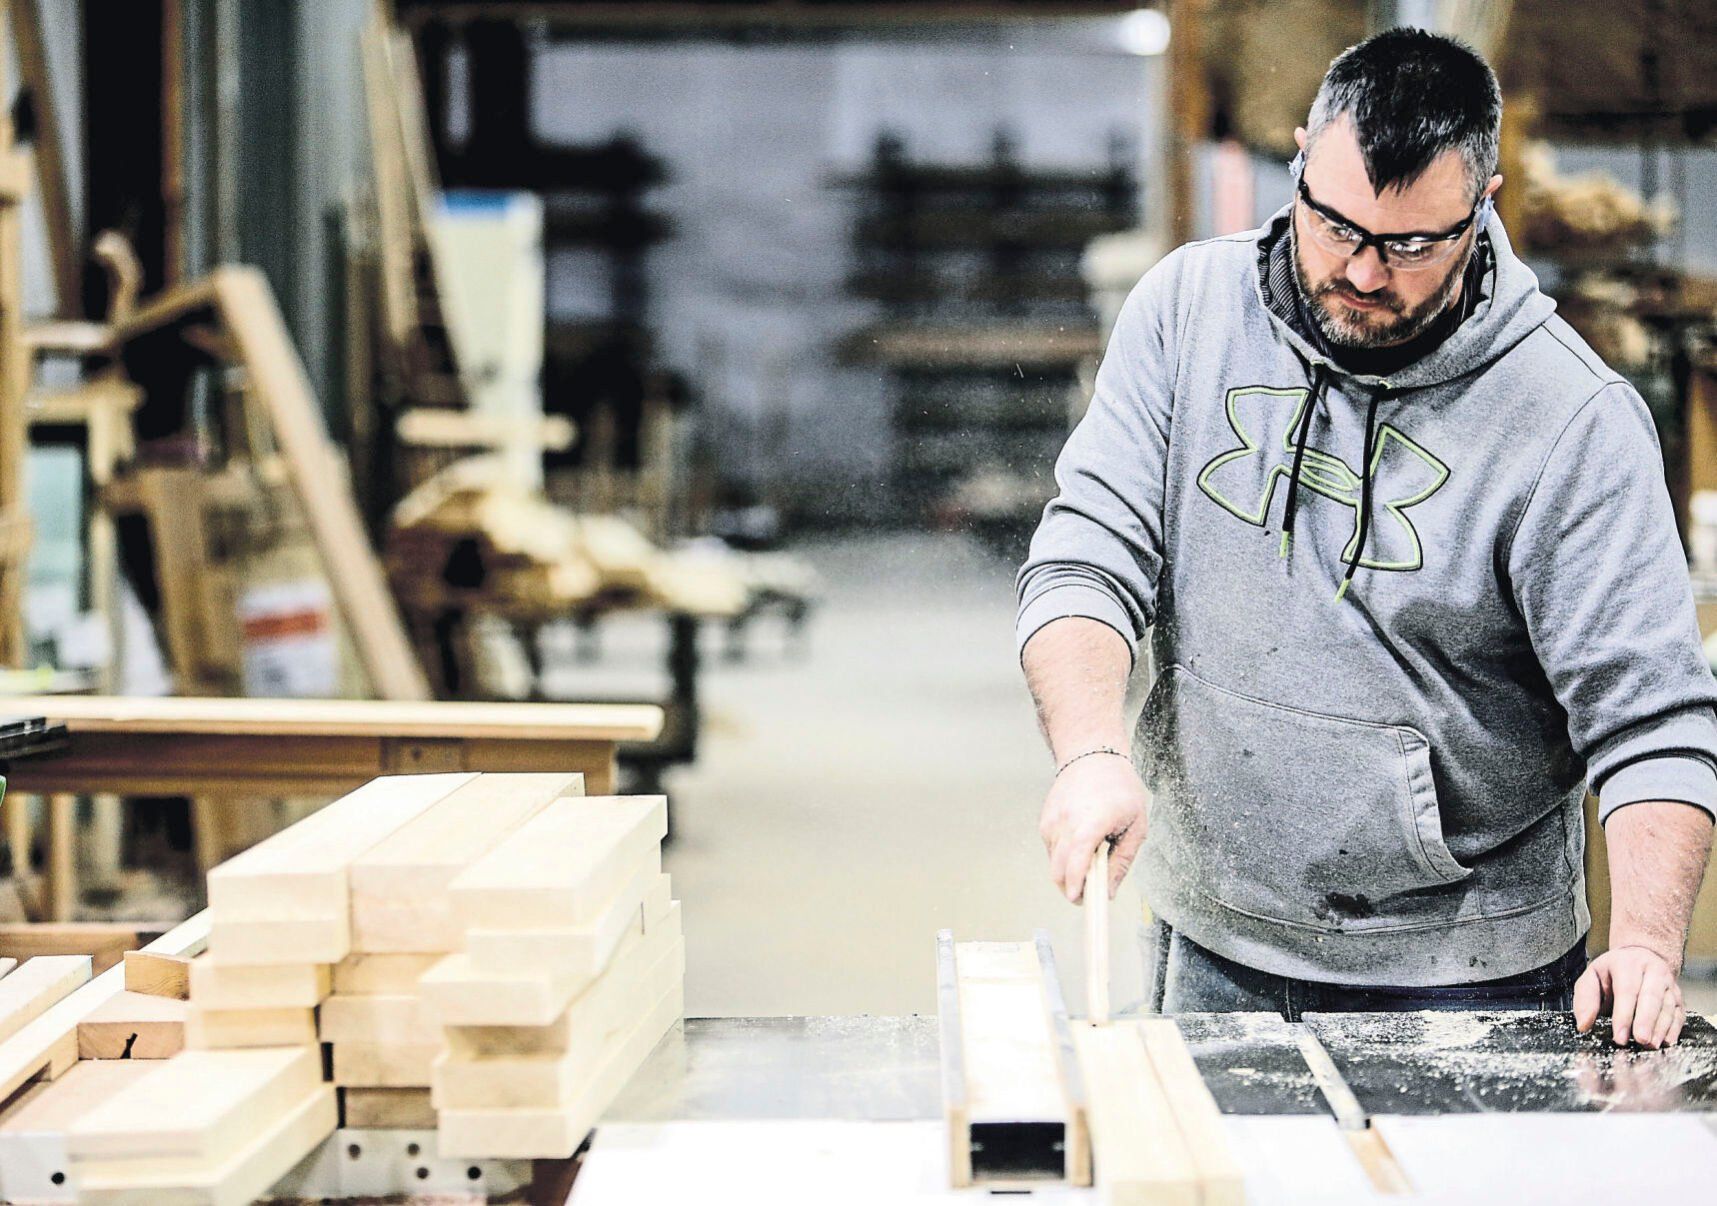 Josh Kruse cuts strips of wood while working at Dubuque Window & Door Co. The Dubuque-based company celebrates its 100th anniversary this year. In 2011, it changed its name from Dubuque Sash & Door and moved its facility to Kerper Boulevard.    PHOTO CREDIT: Dave Kettering